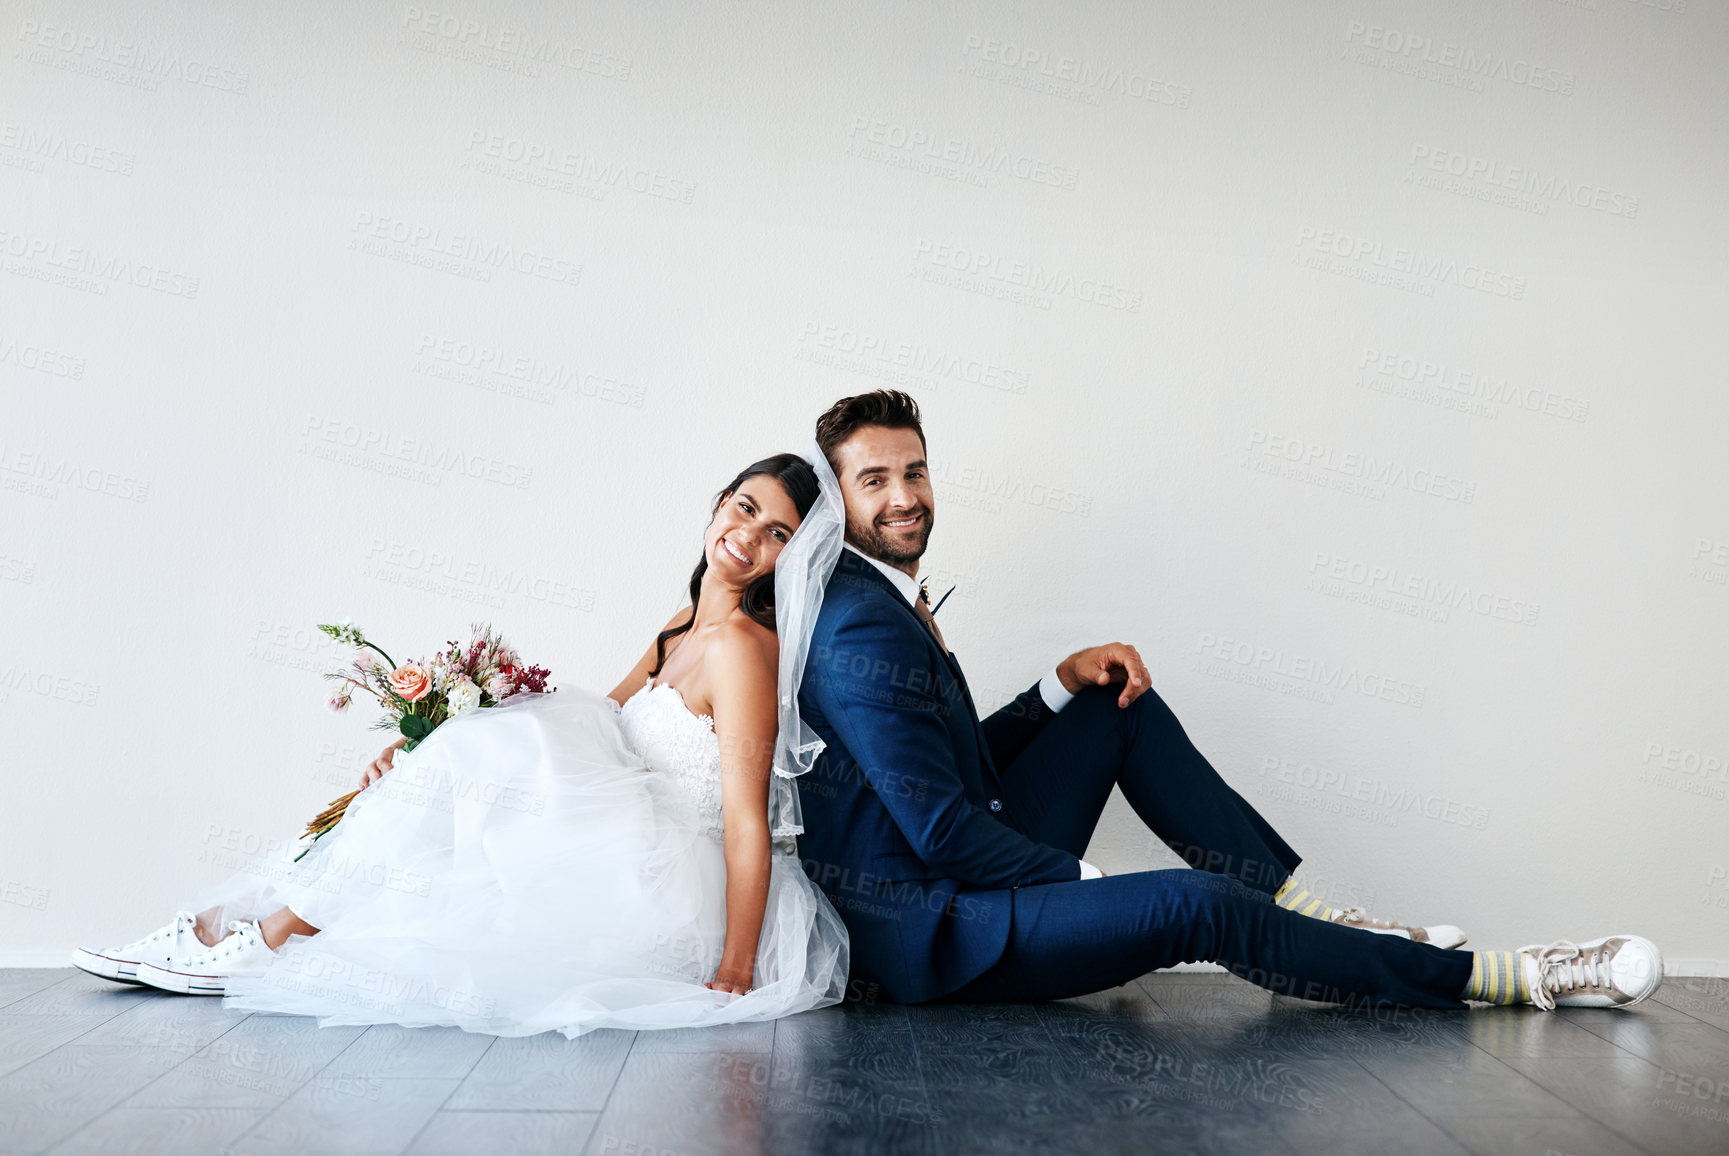 Buy stock photo Studio shot of a newly married young couple sitting back to back on the floor against a gray background